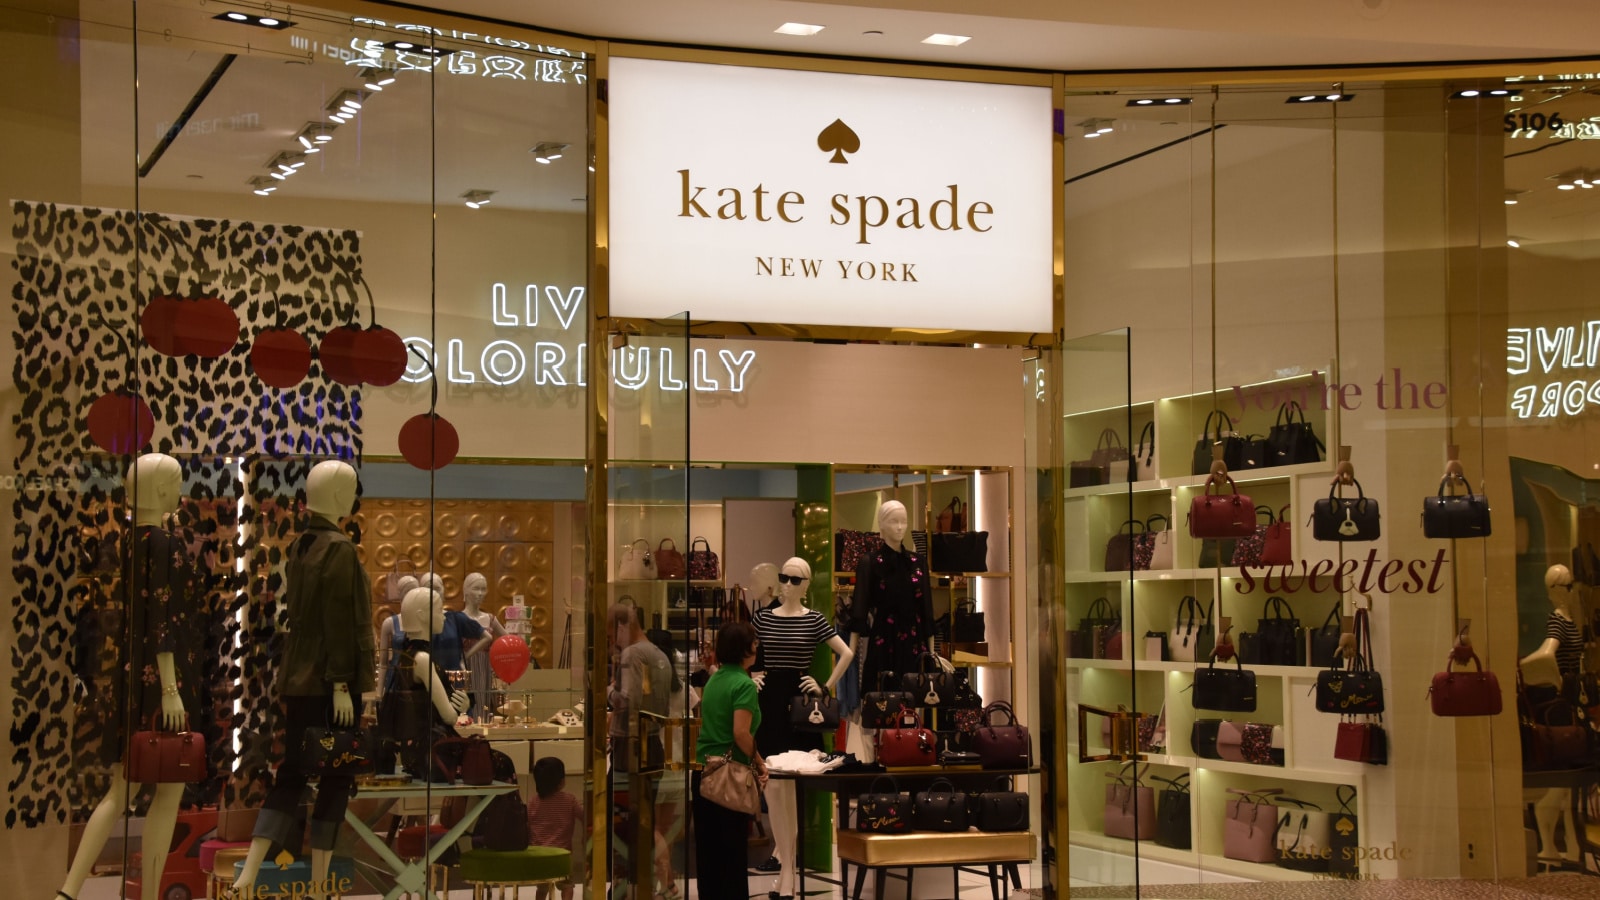 BLOOMINGTON, MINNESOTA - JUL 27: Kate Spade New York store at Mall of America in Bloomington, Minnesota, on July 27, 2017. Its the second largest mall in leaseable space and largest mall in the US.